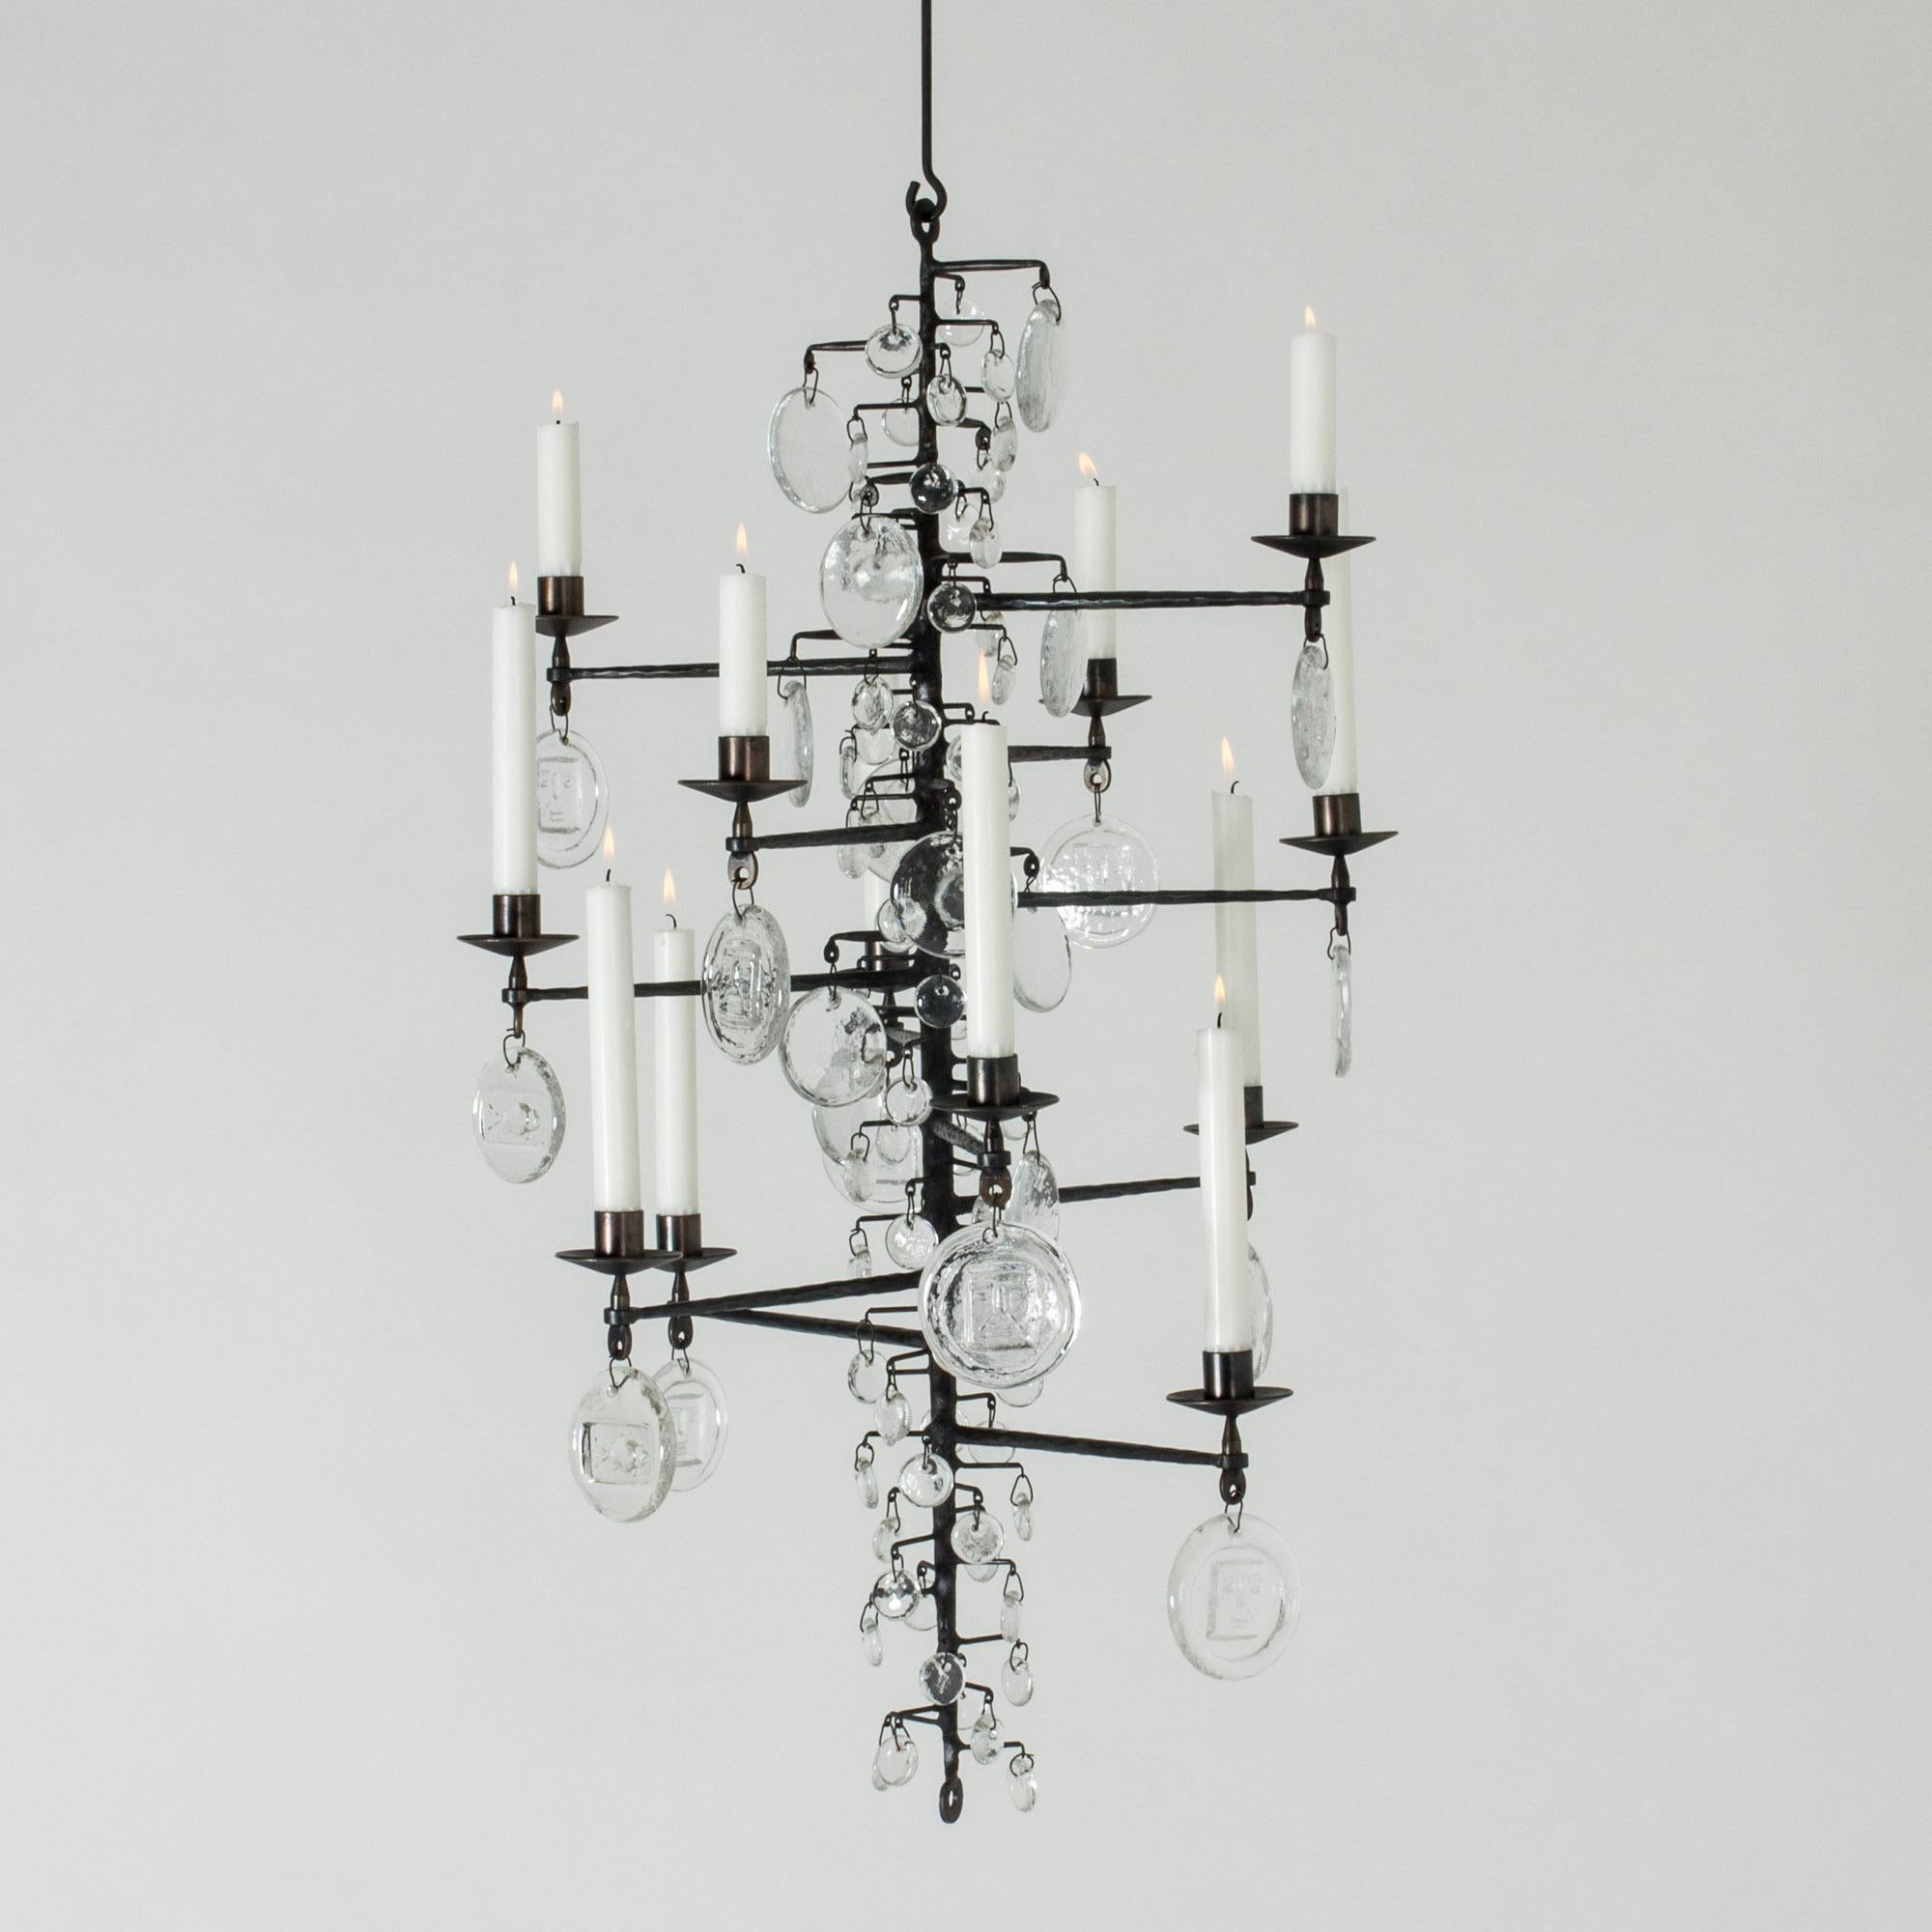 Stunning candle chandelier by Erik Höglund, made from wrought iron and glass. The long, rustic iron frame is adorned with different sized glass medallions that look like large rain drops on a bare tree. The biggest medallions are embossed with